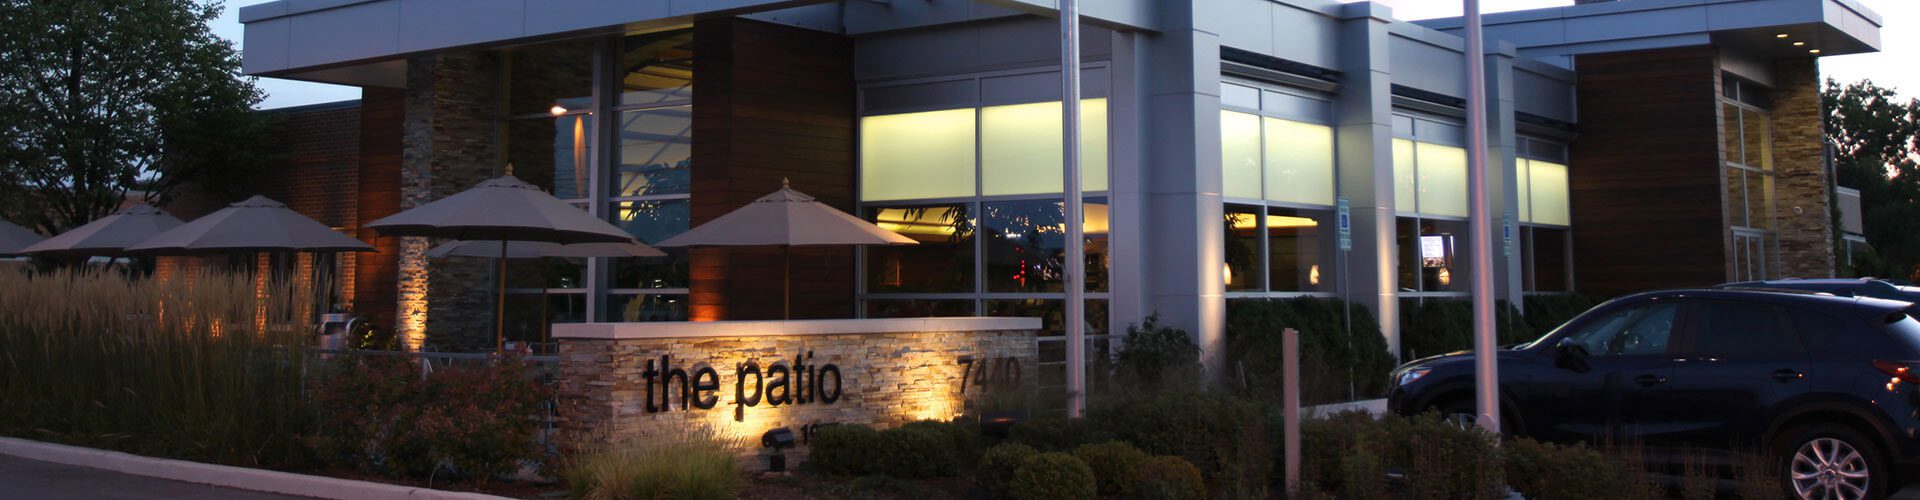 The Patio restaurant building with a light up sign.